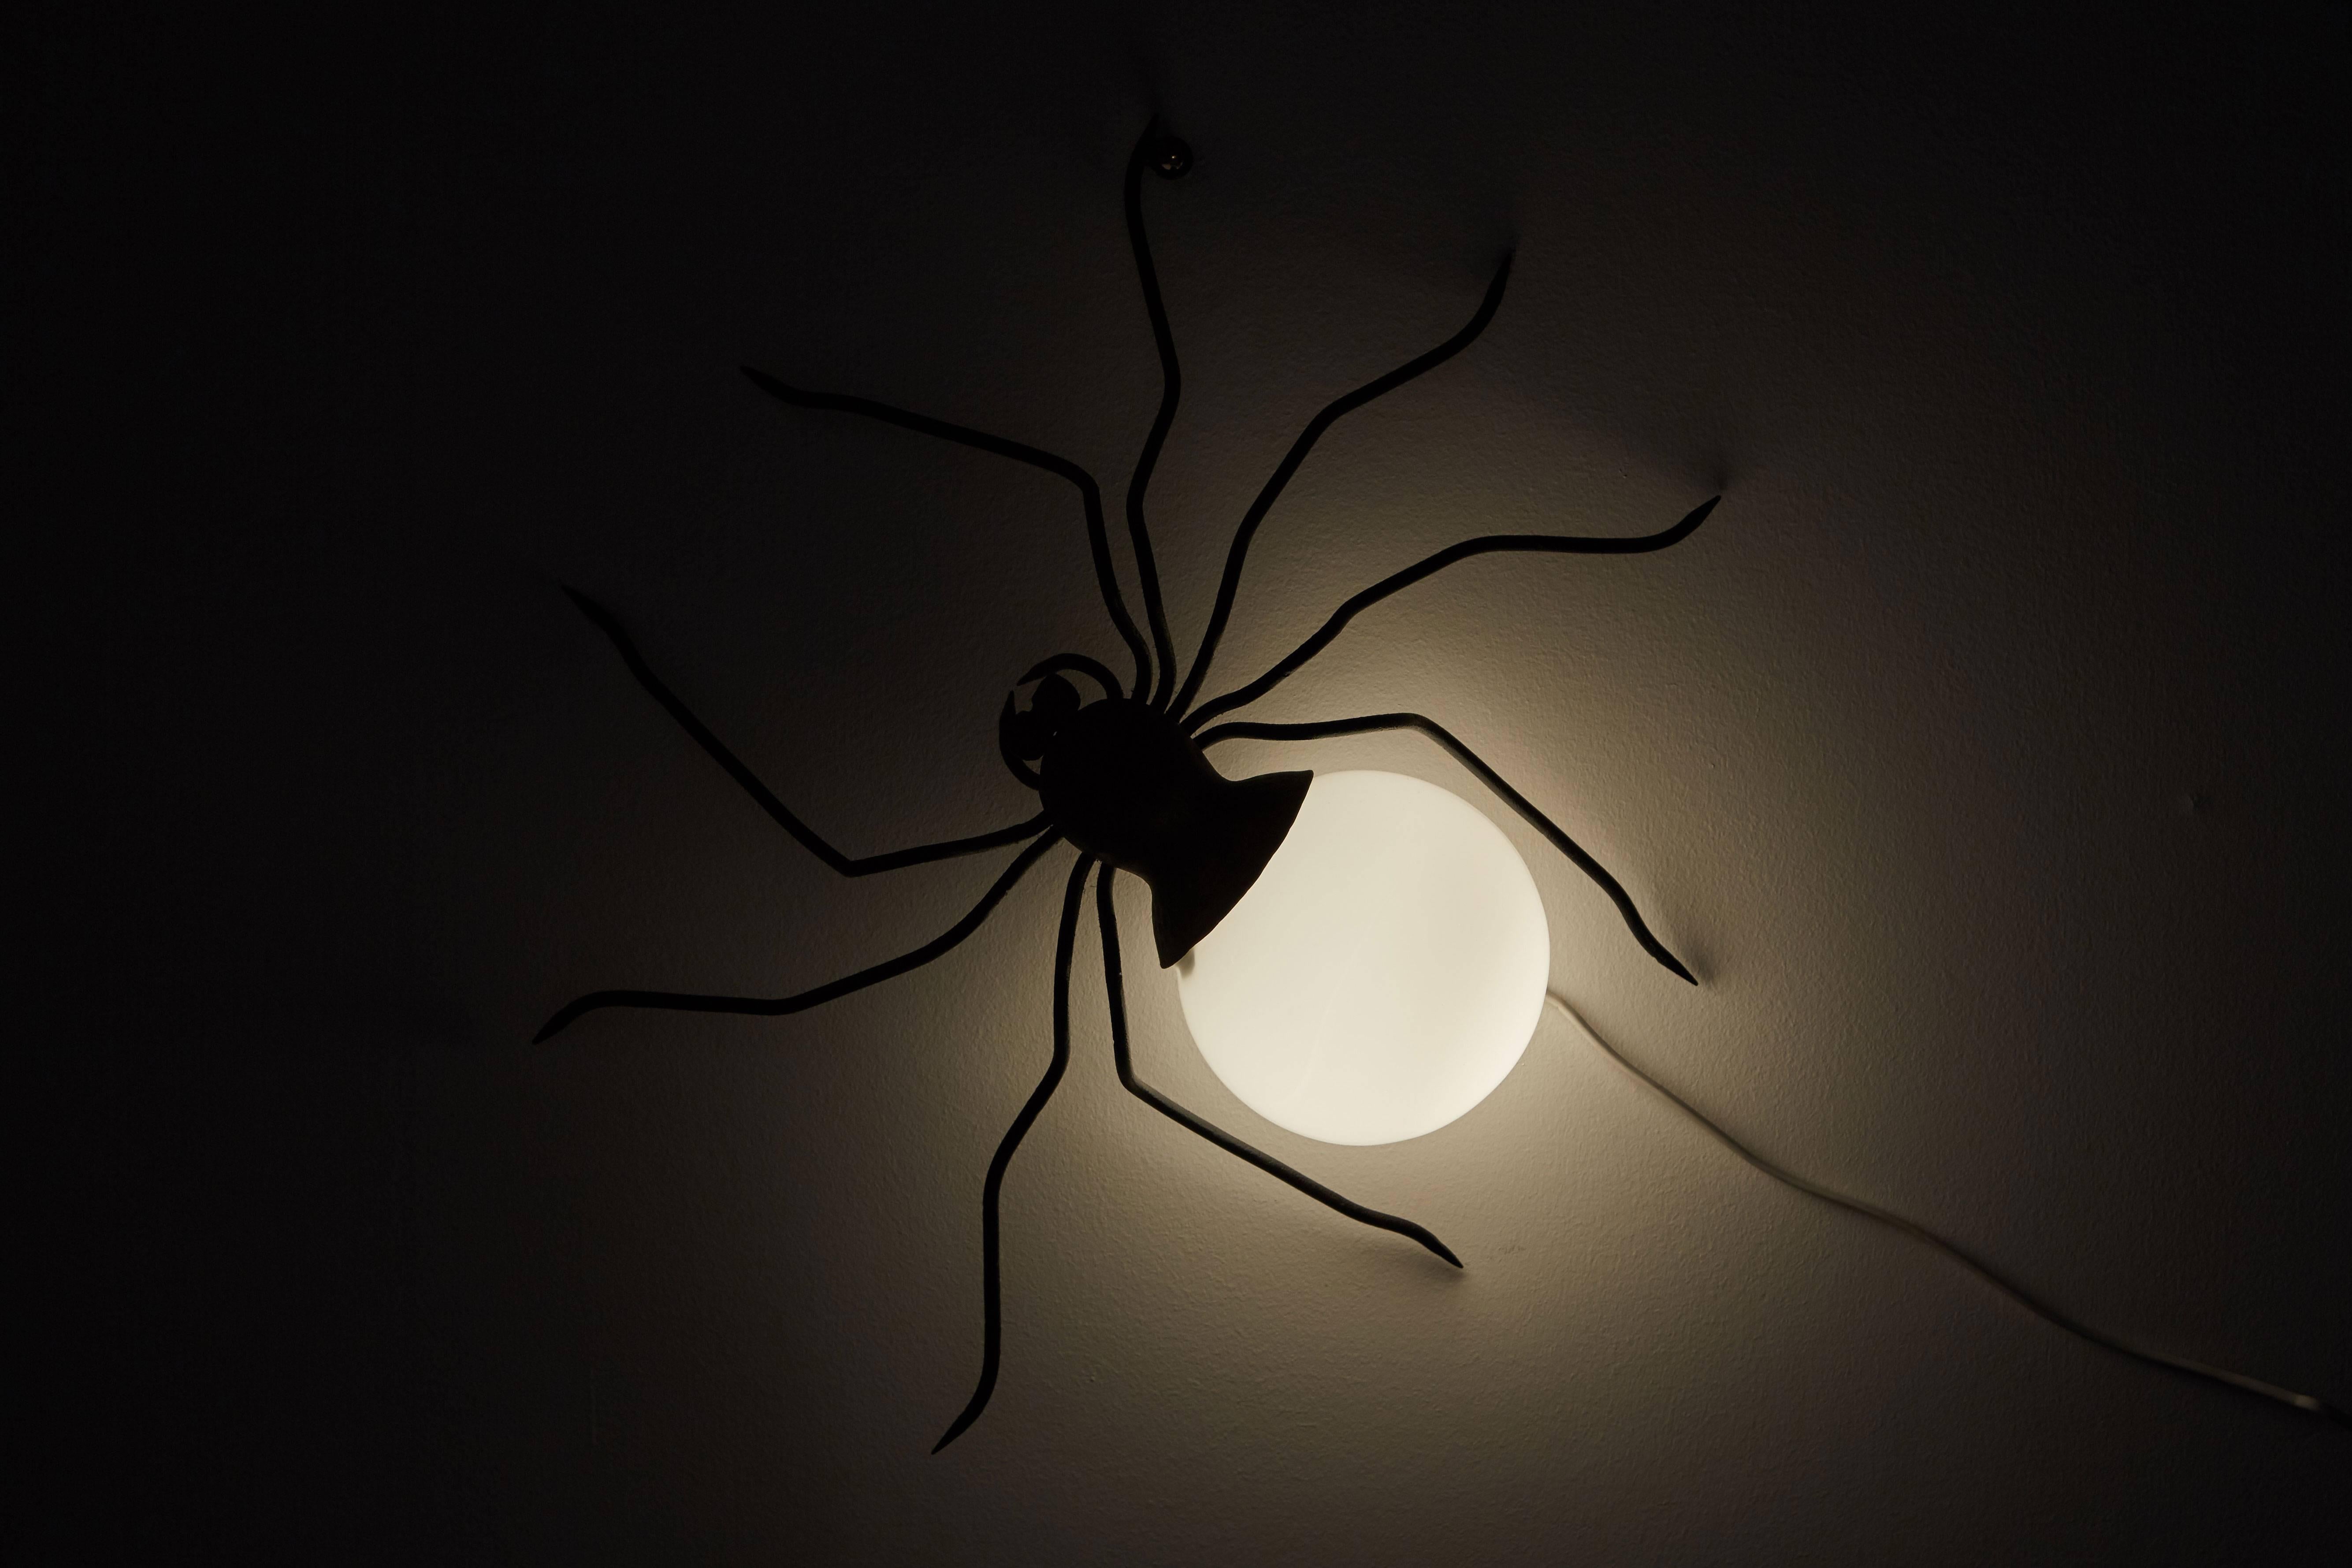 Spider wall light designed in Italy, circa 1950s. Patinated brass hardware and white glass globe. Wired for US junction boxes. Takes one E27 75 W maximum bulb.